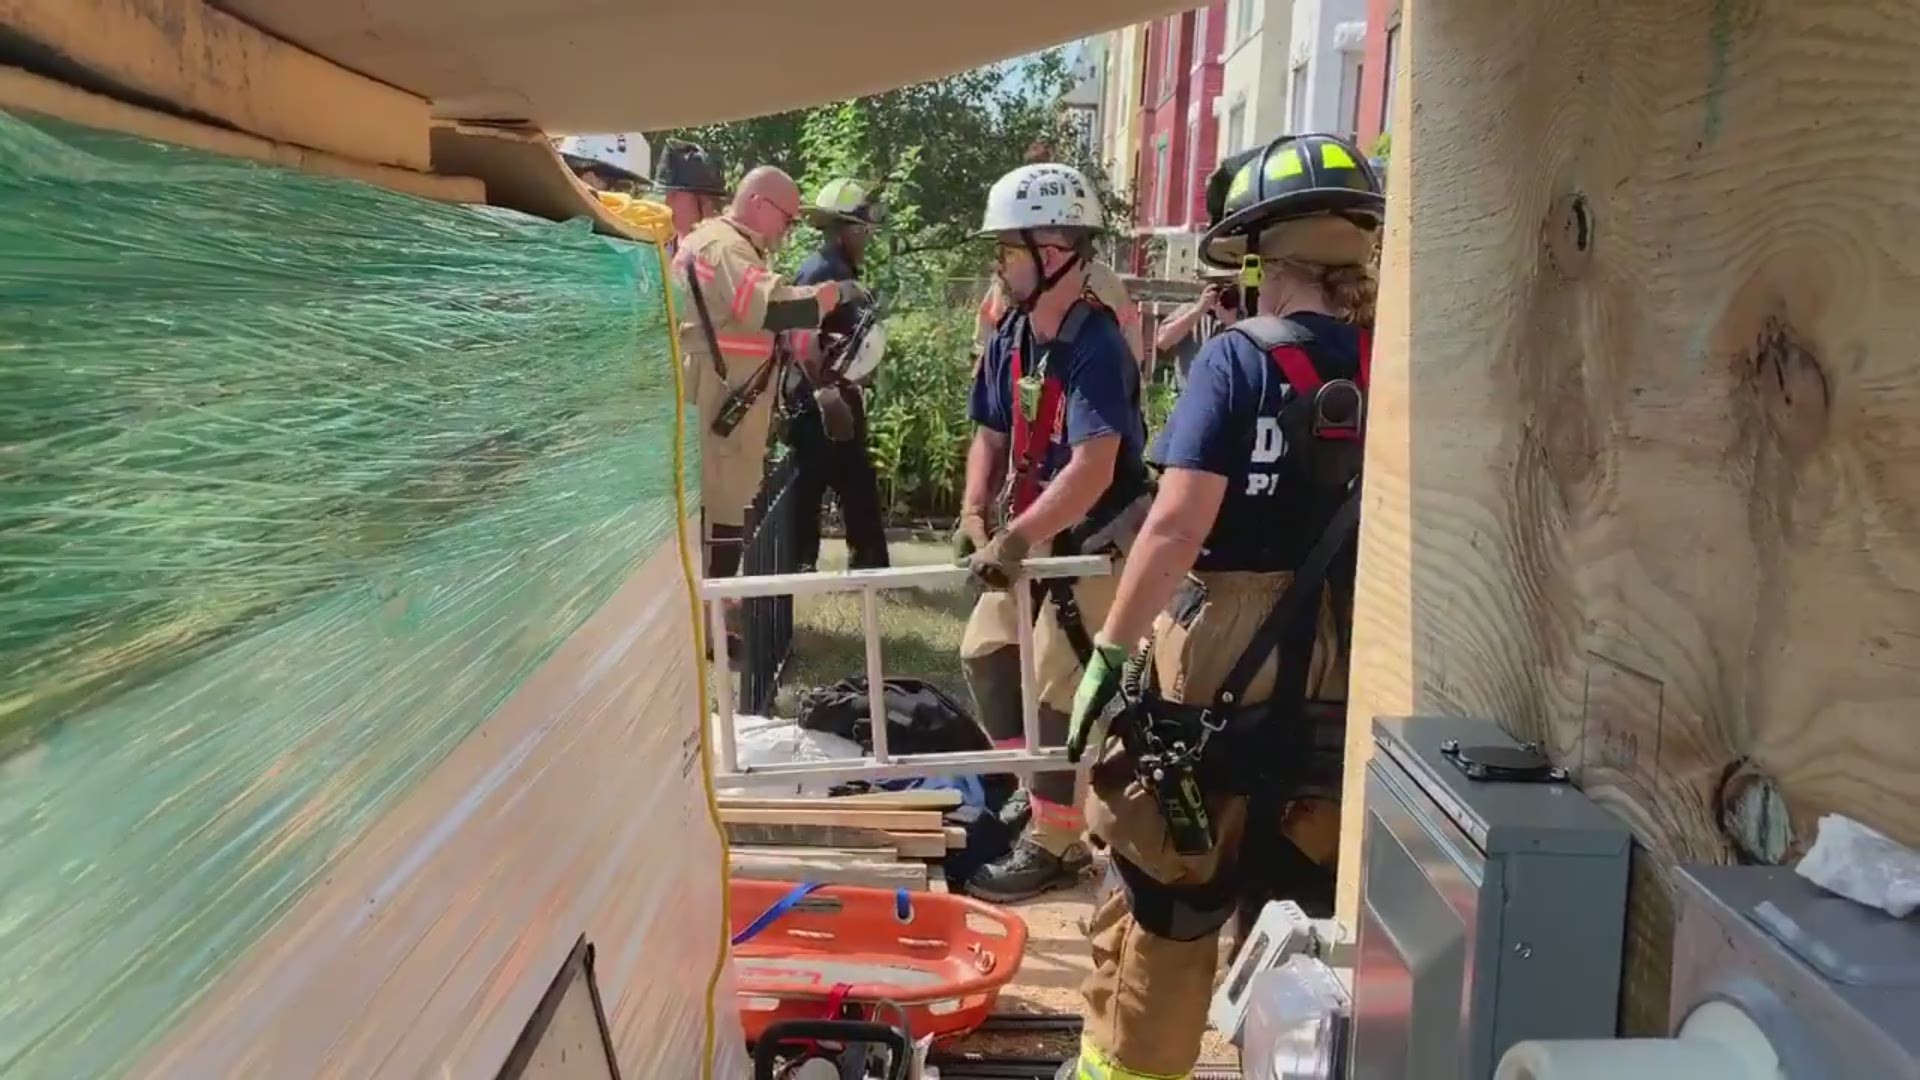 D.C. Fire and EMS rescued a man whose leg was trapped inside a trench in Northwest on Tuesday. The man was pulled out with non-life threatening injuries.